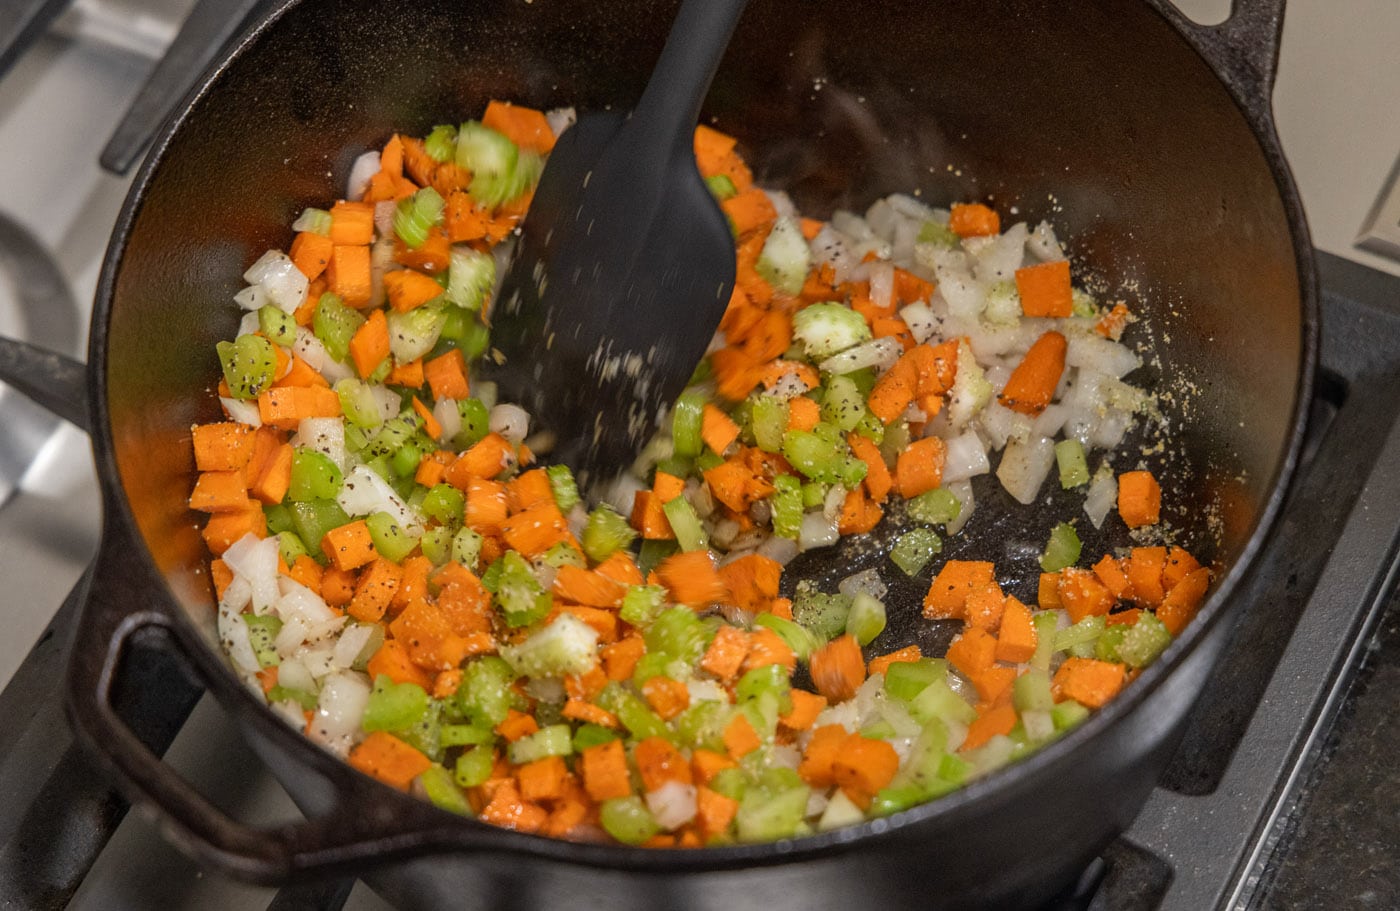 cooking onion, celery, and carrots in a pan